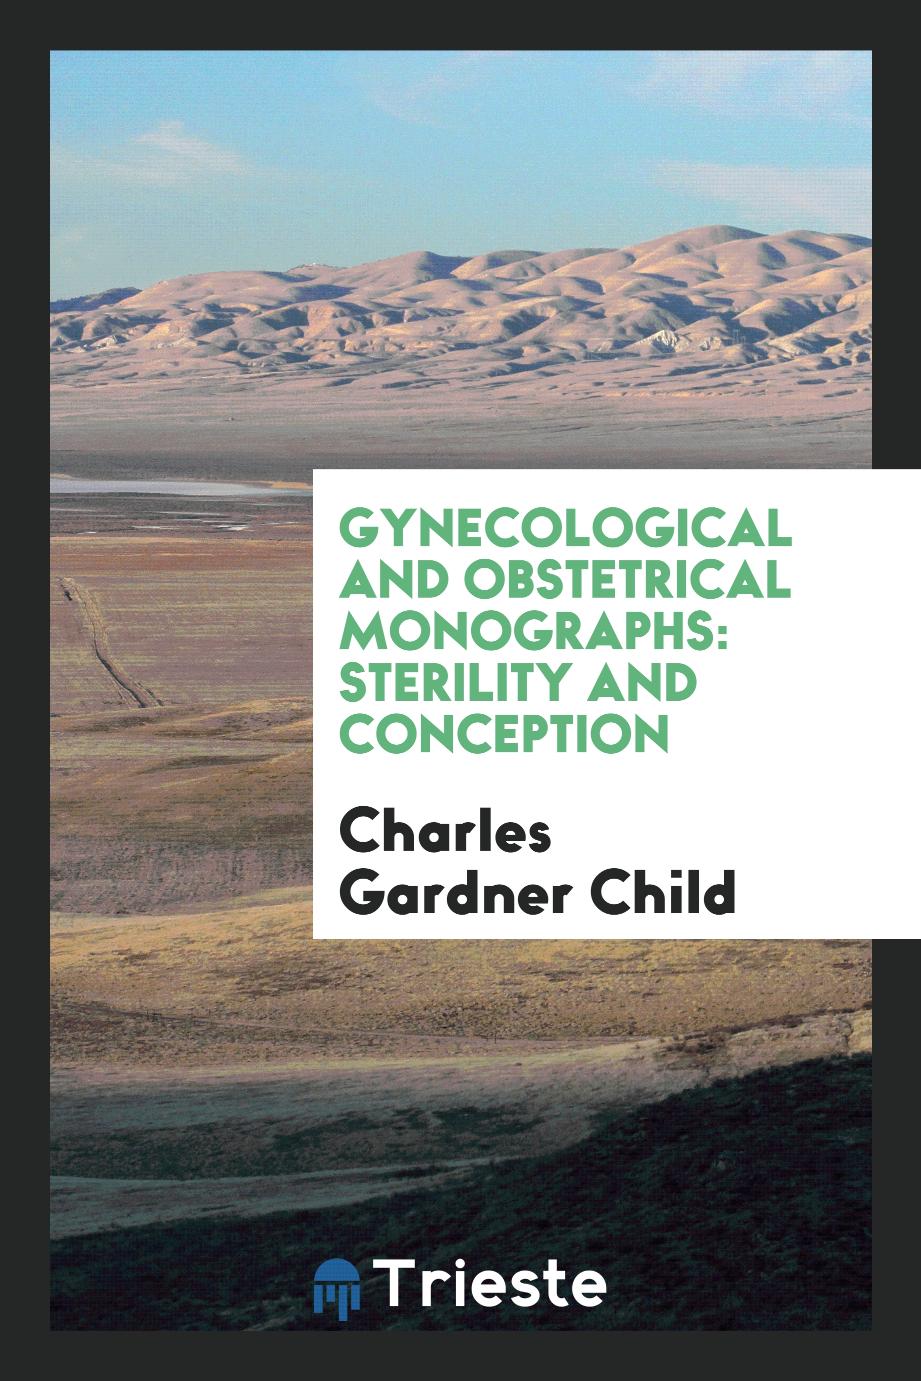 Gynecological and obstetrical monographs: Sterility and conception